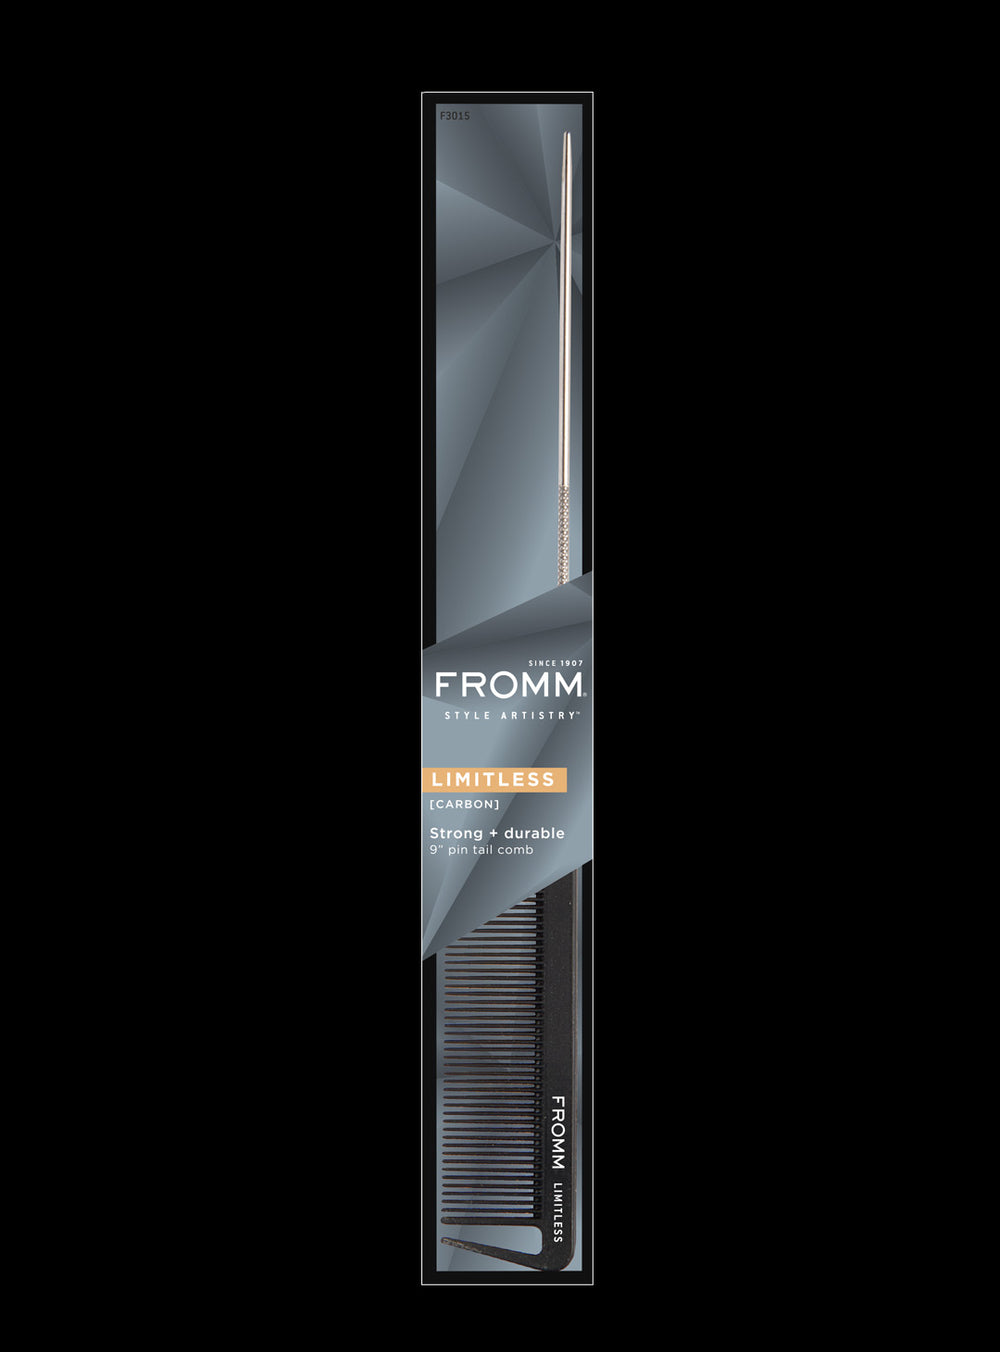 Fromm Limitless 9" Carbon Pin Tail Comb